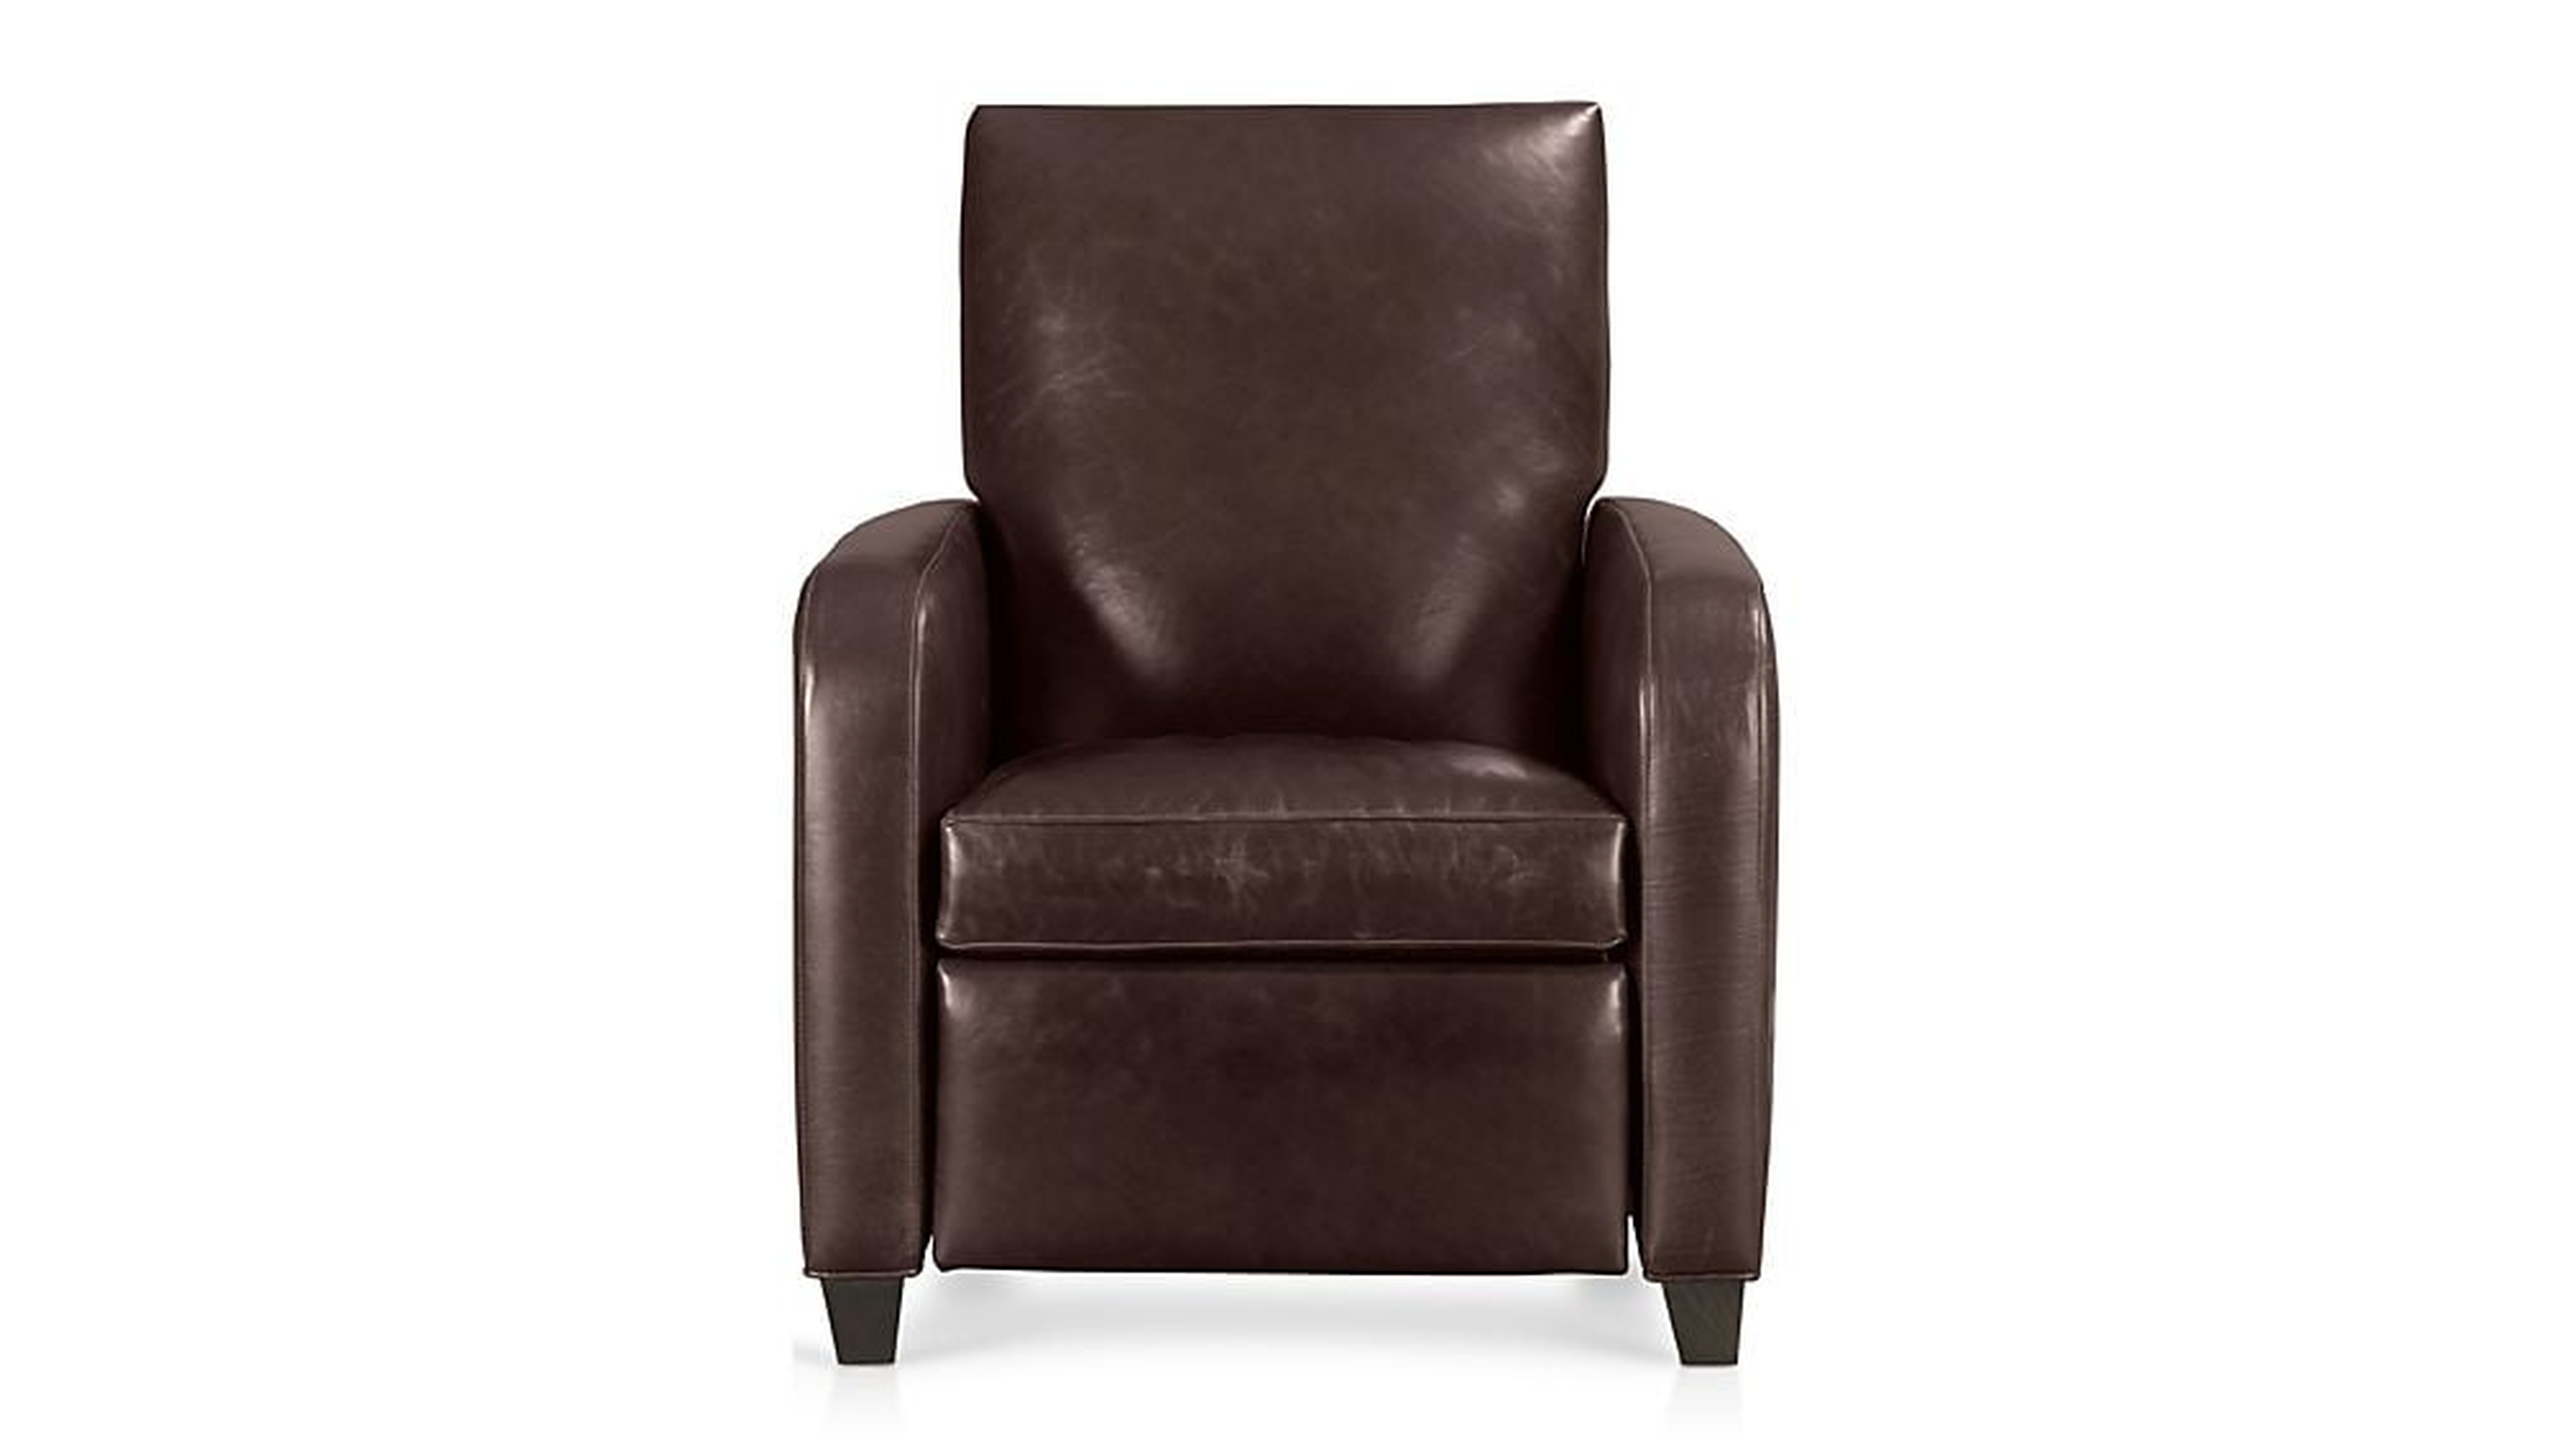 Royce Leather Recliner, Libby Cashew - Crate and Barrel